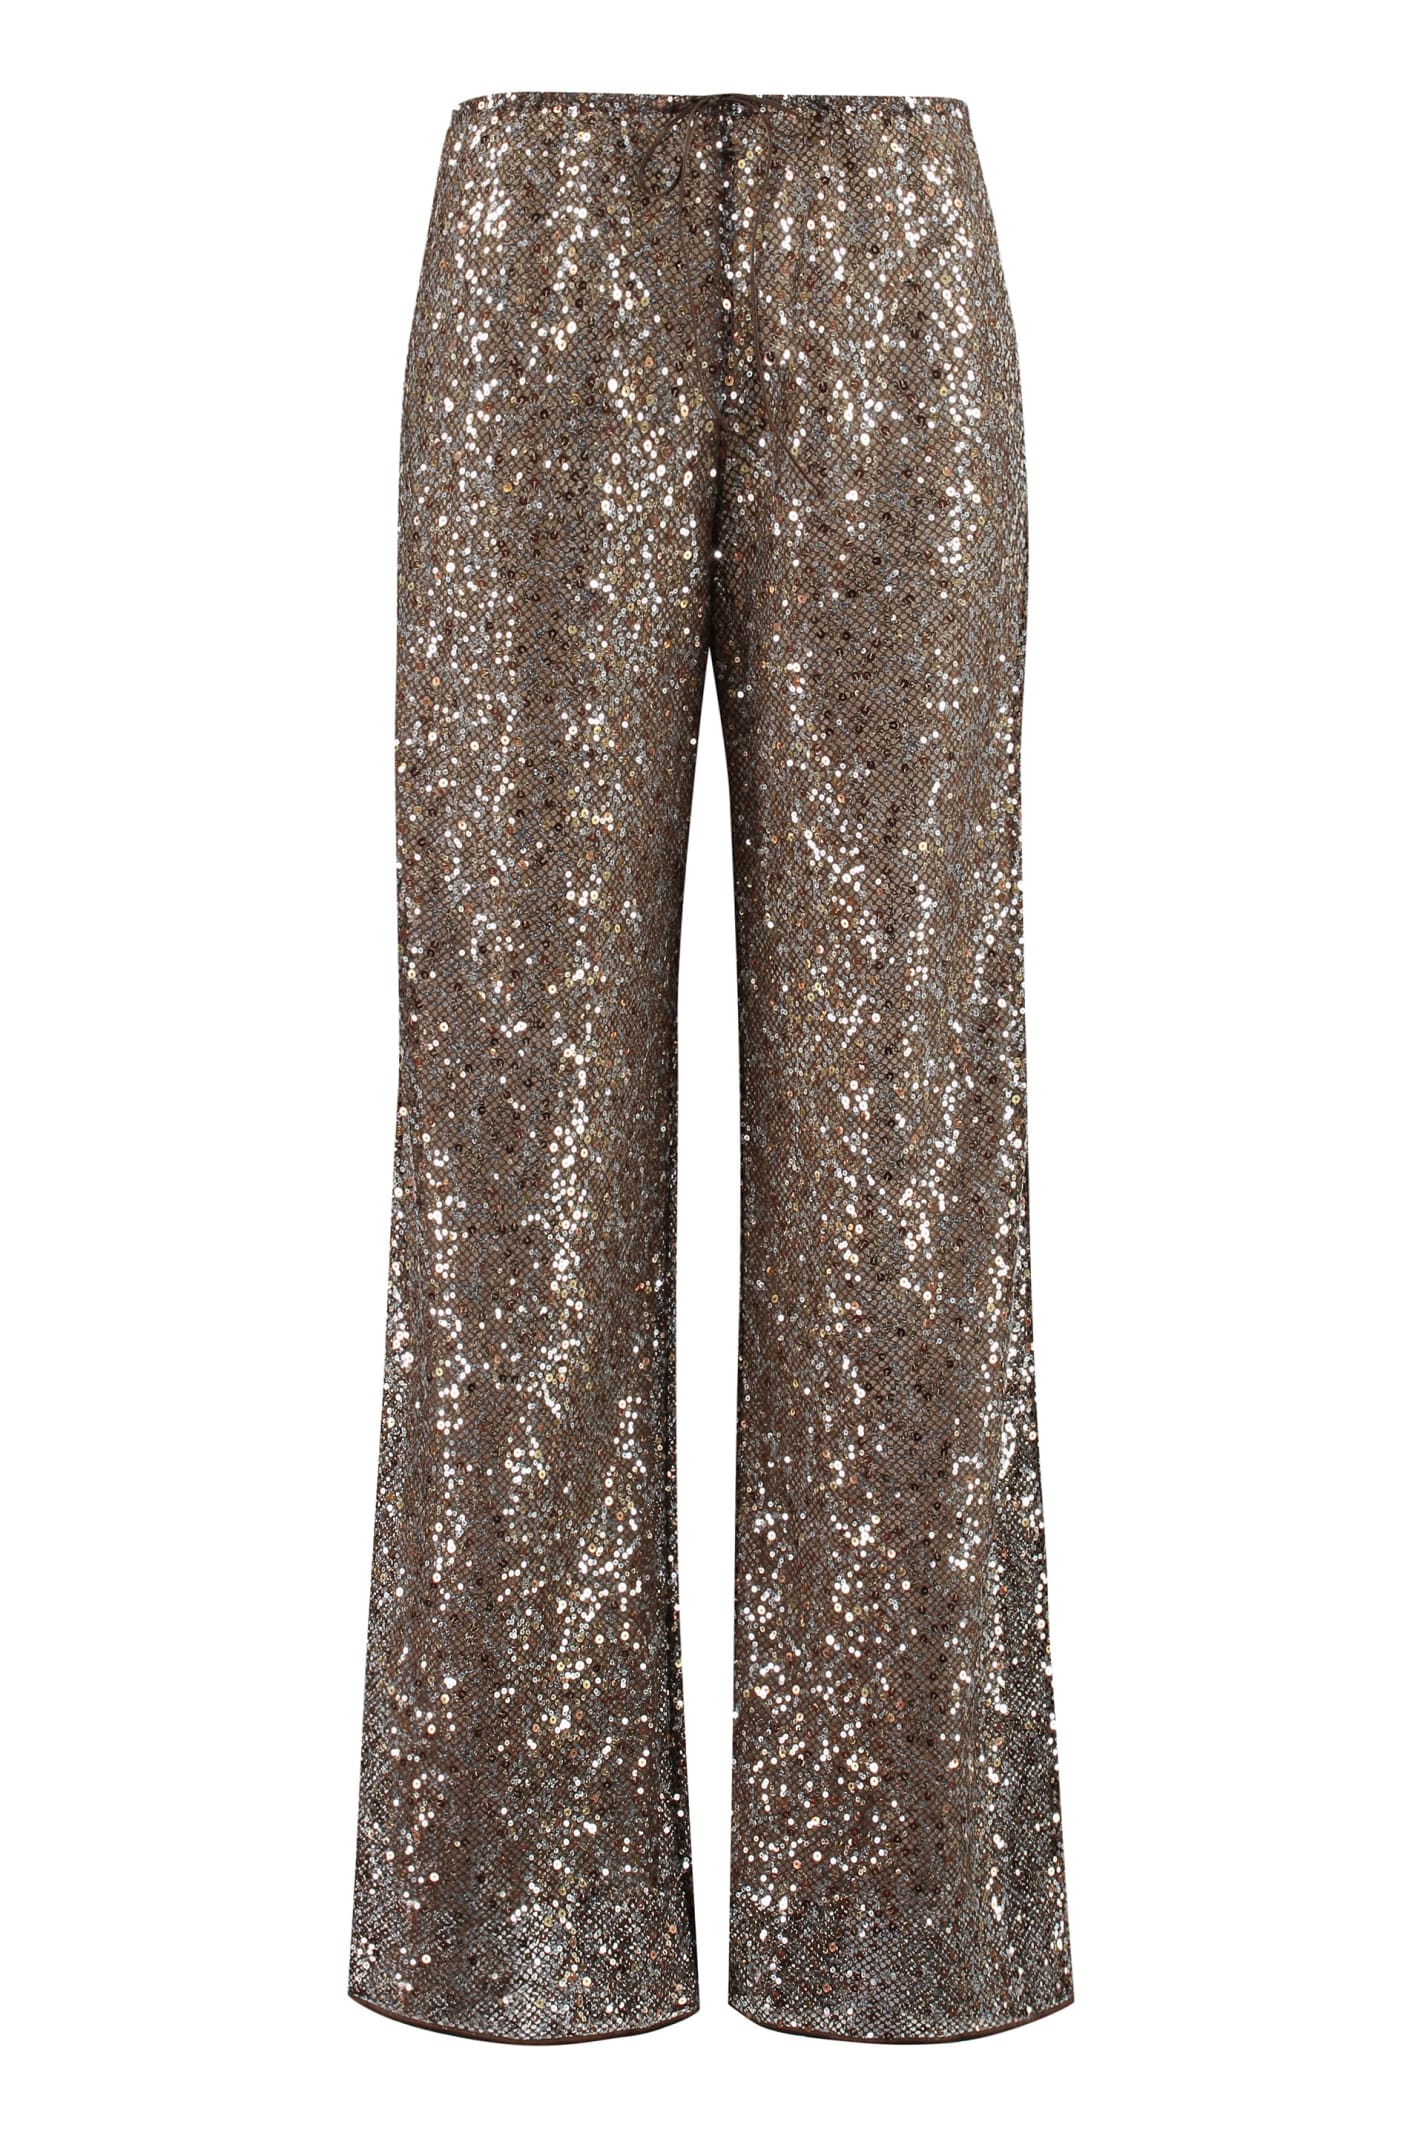 OSEREE NETQUINS SEQUINED TROUSERS